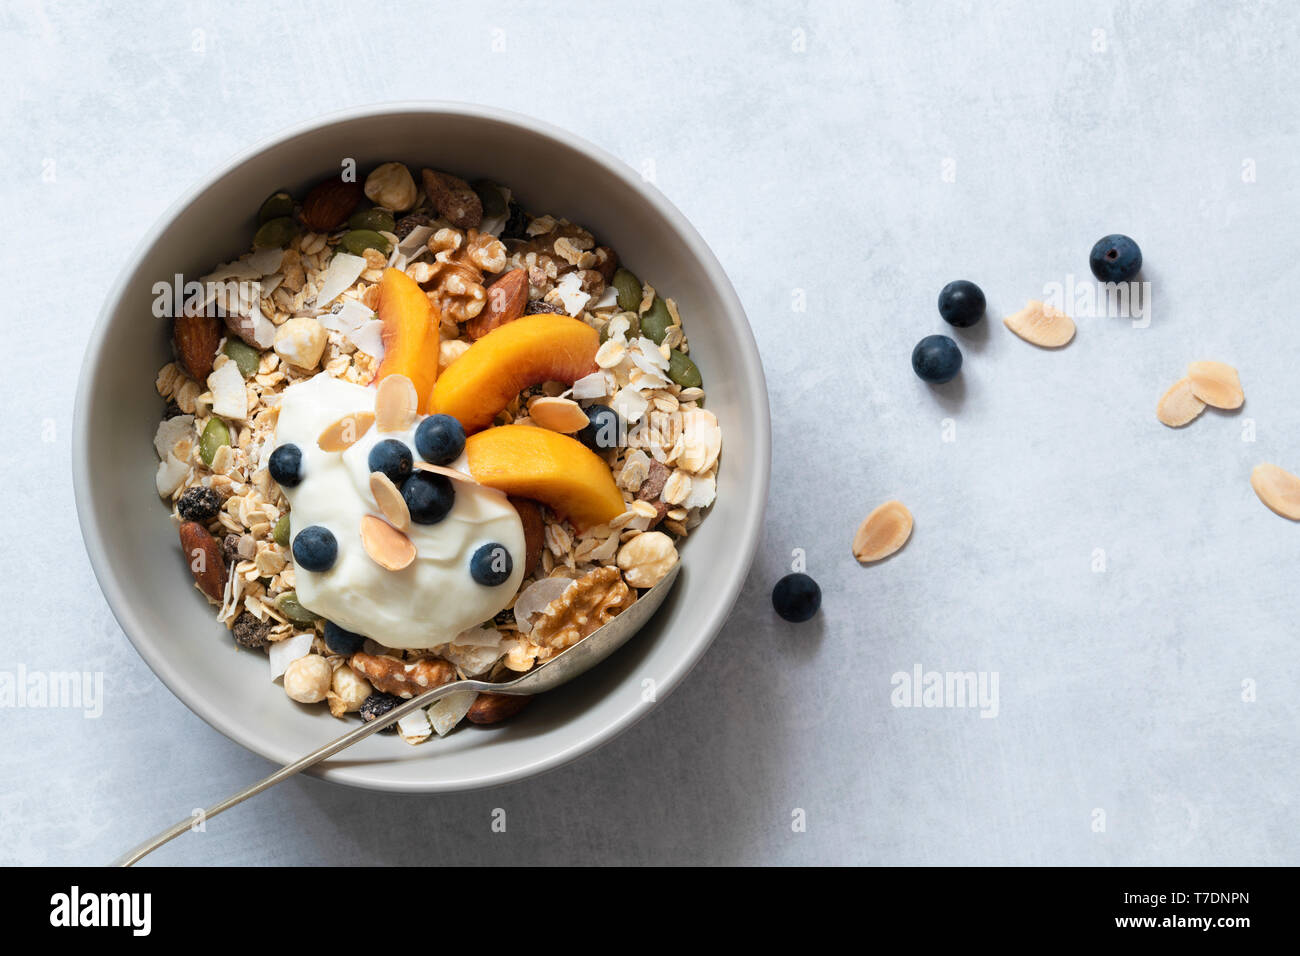 Bowl of homemade muesli with sliced peaches, yoghurt and blueberries. Stock Photo